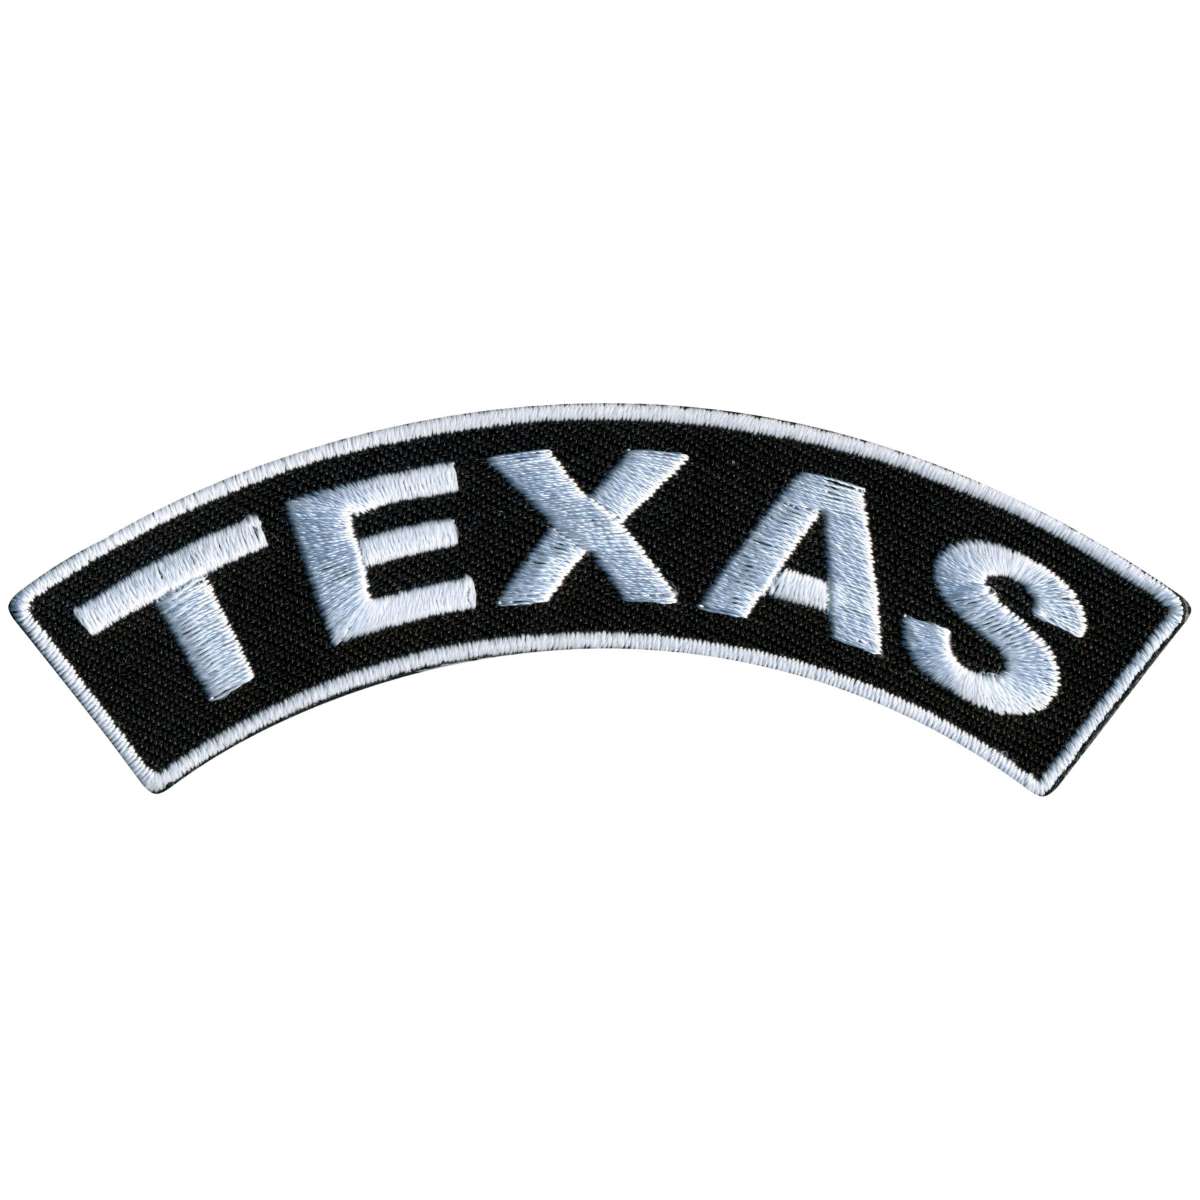 Hot Leathers Texas 4” X 1” Top Rocker Patch PPM4086